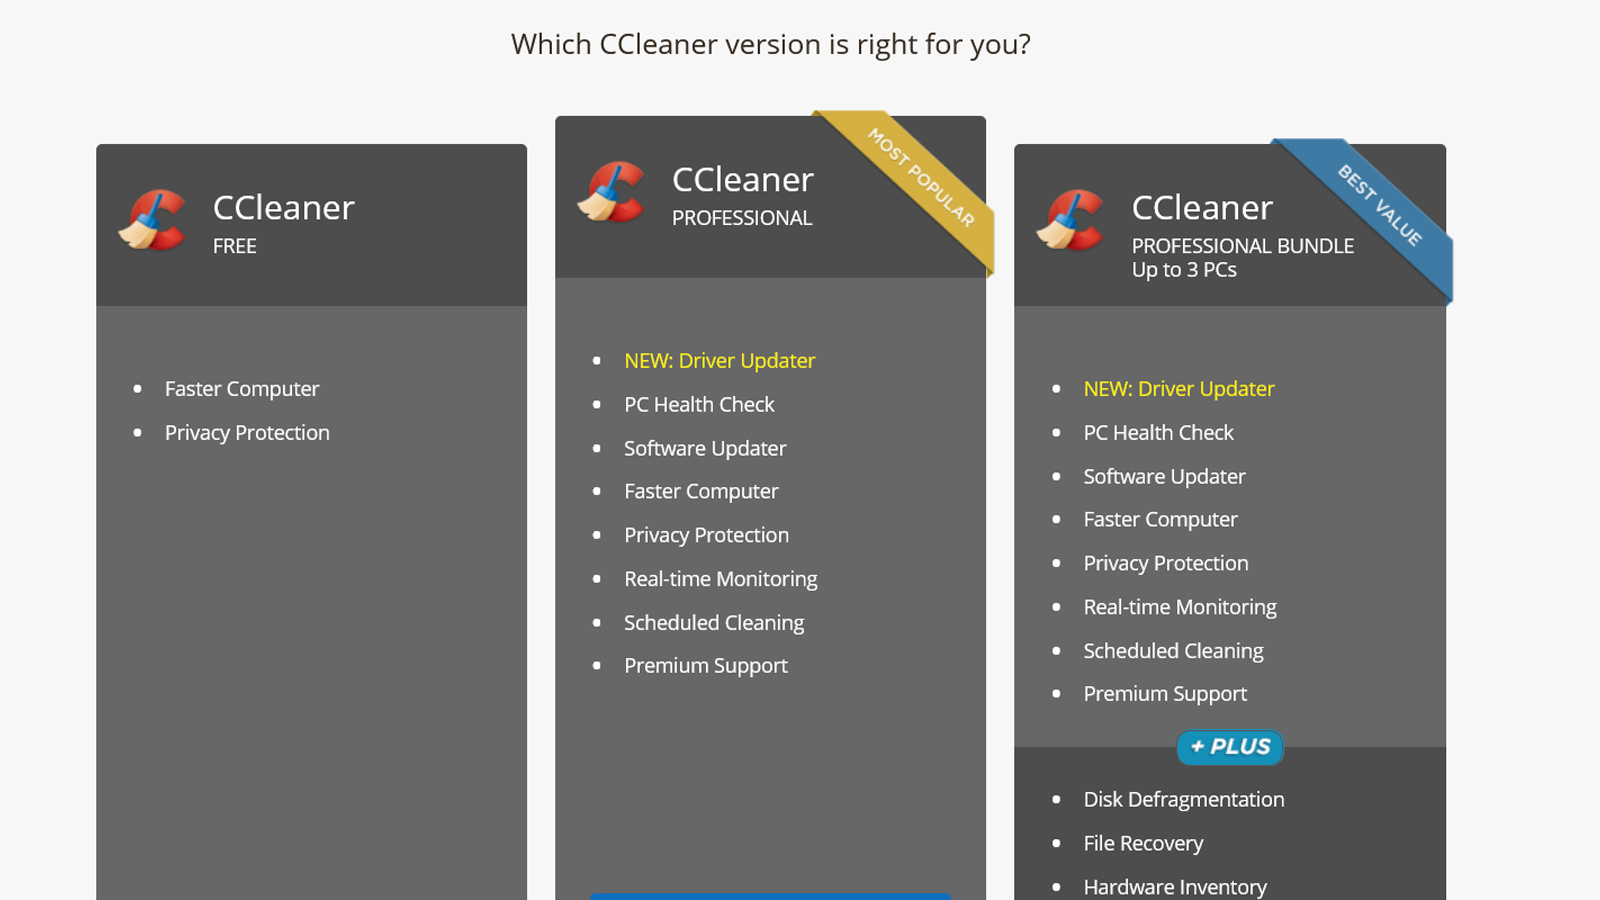 Find pricing, reviews and other details about CCleaner